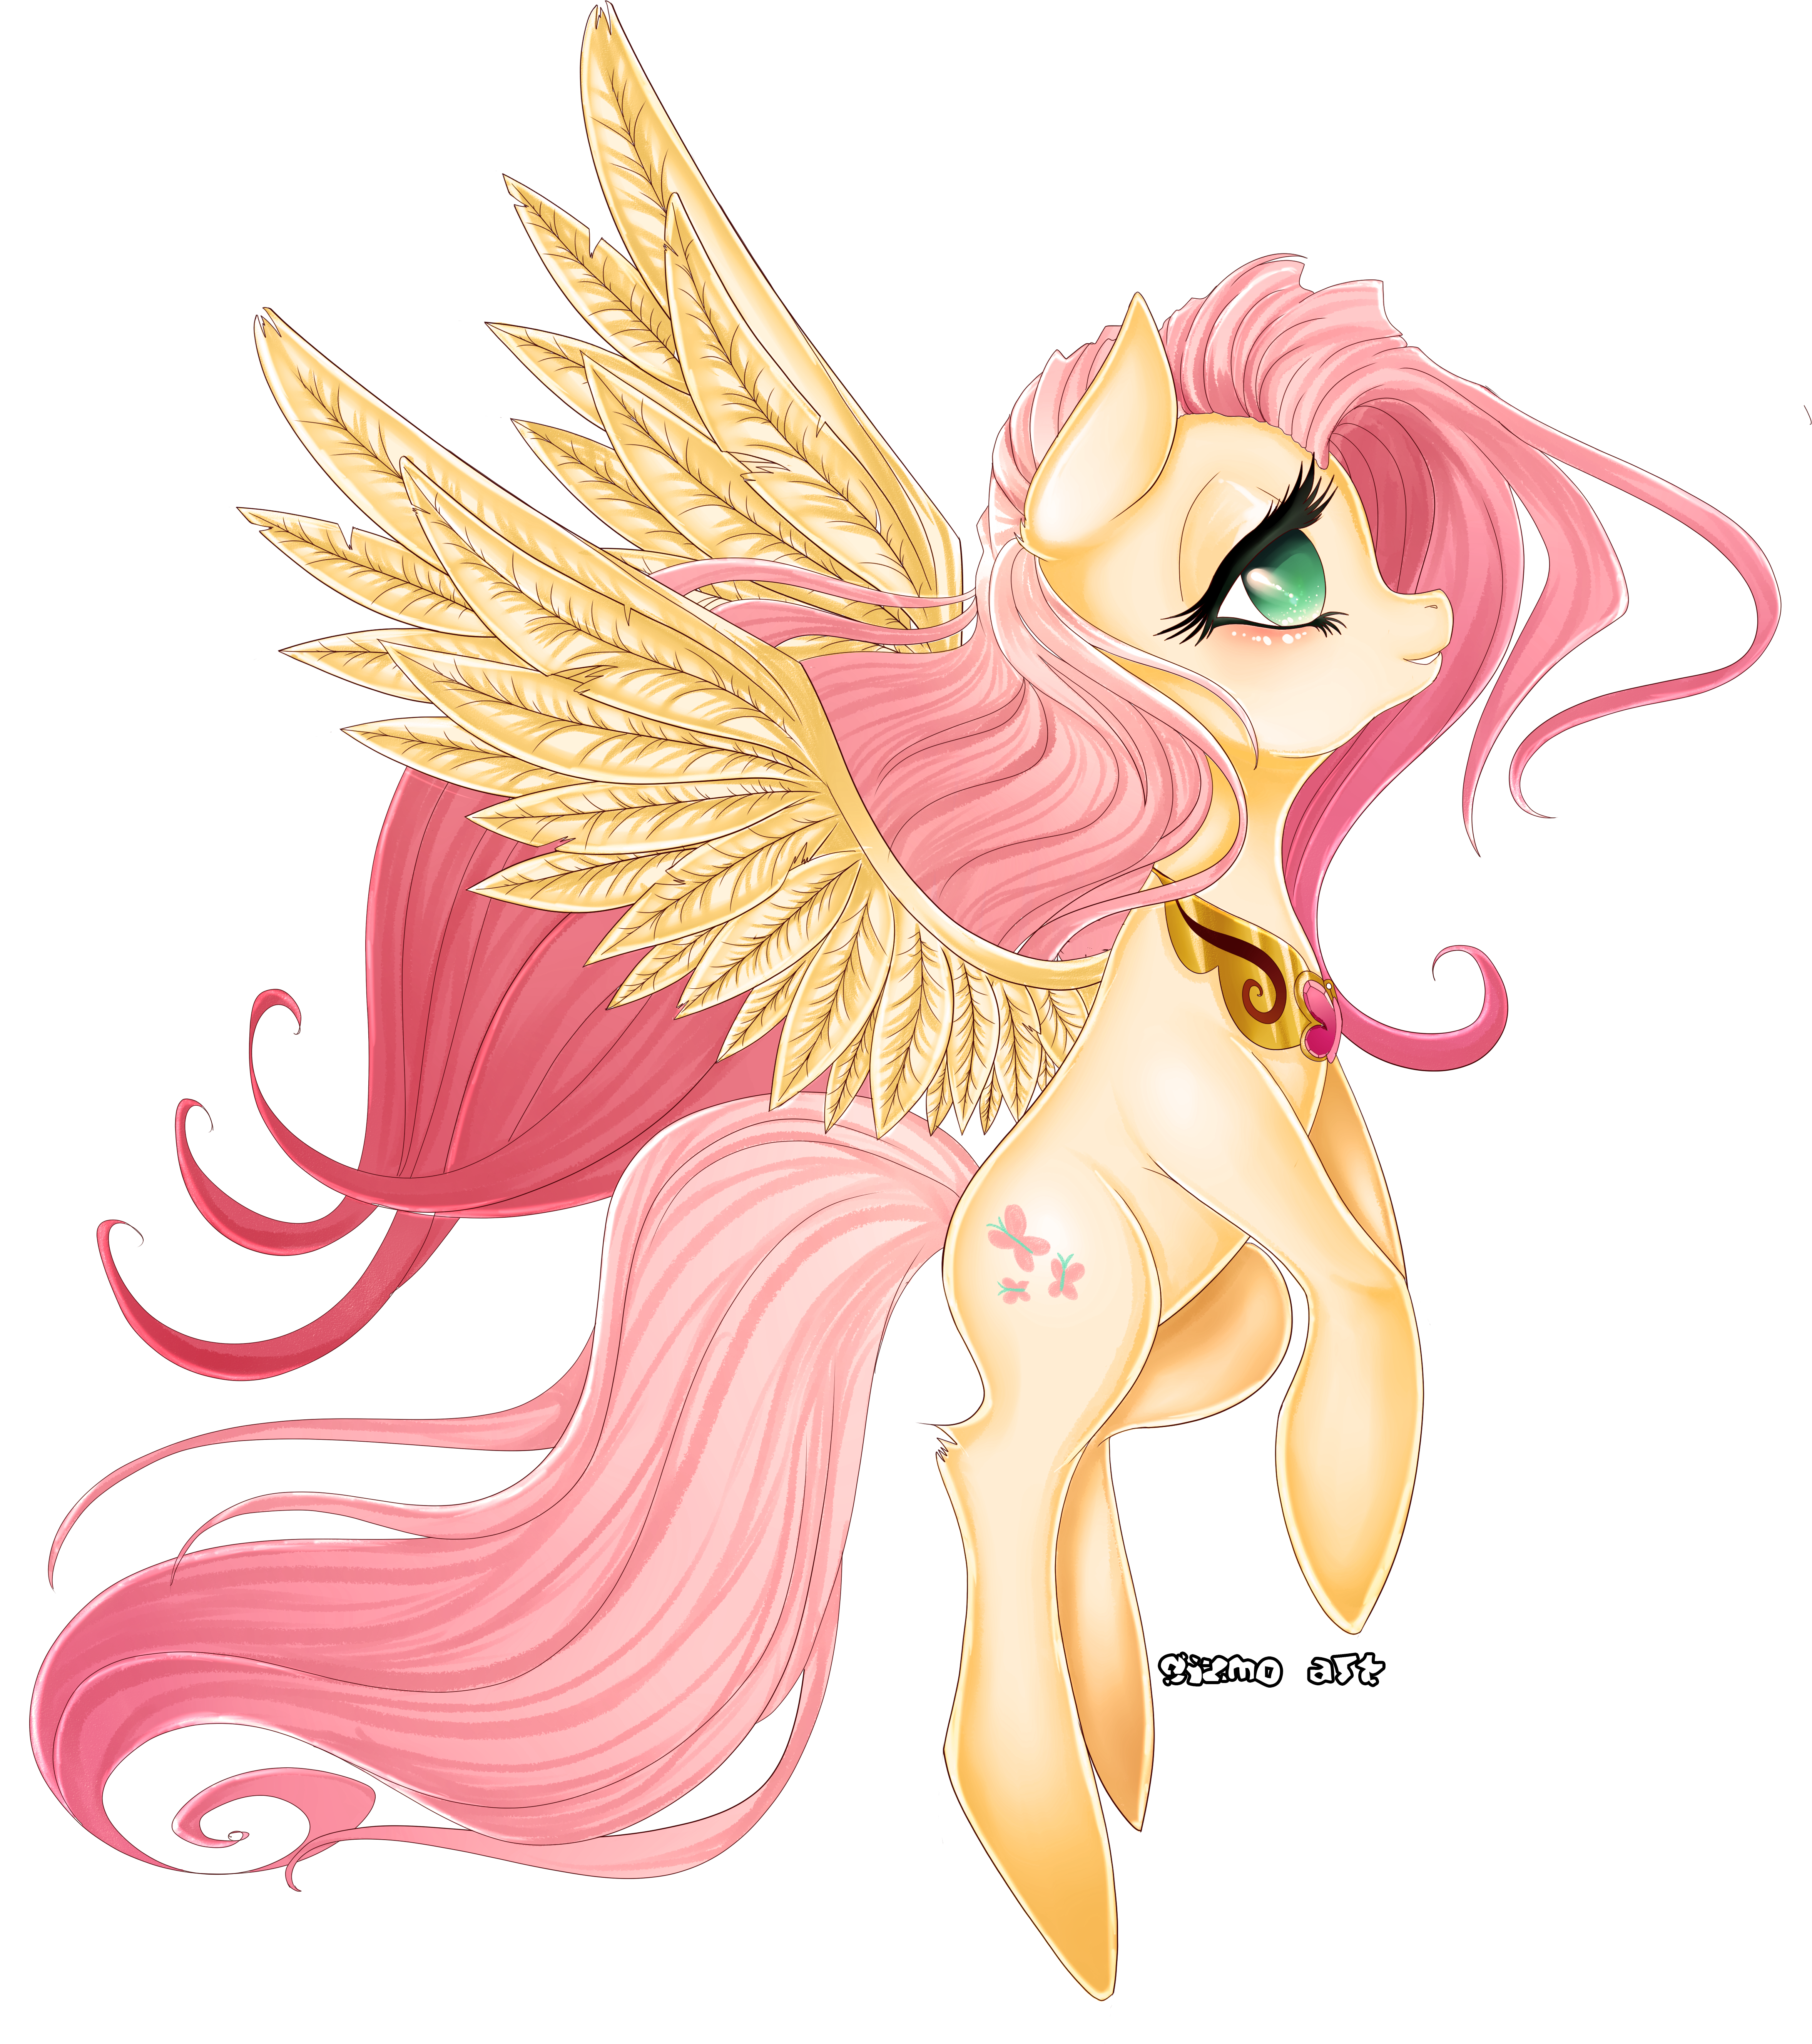 fluttershy_by_0_gizmosue_0-d5o99bo.png